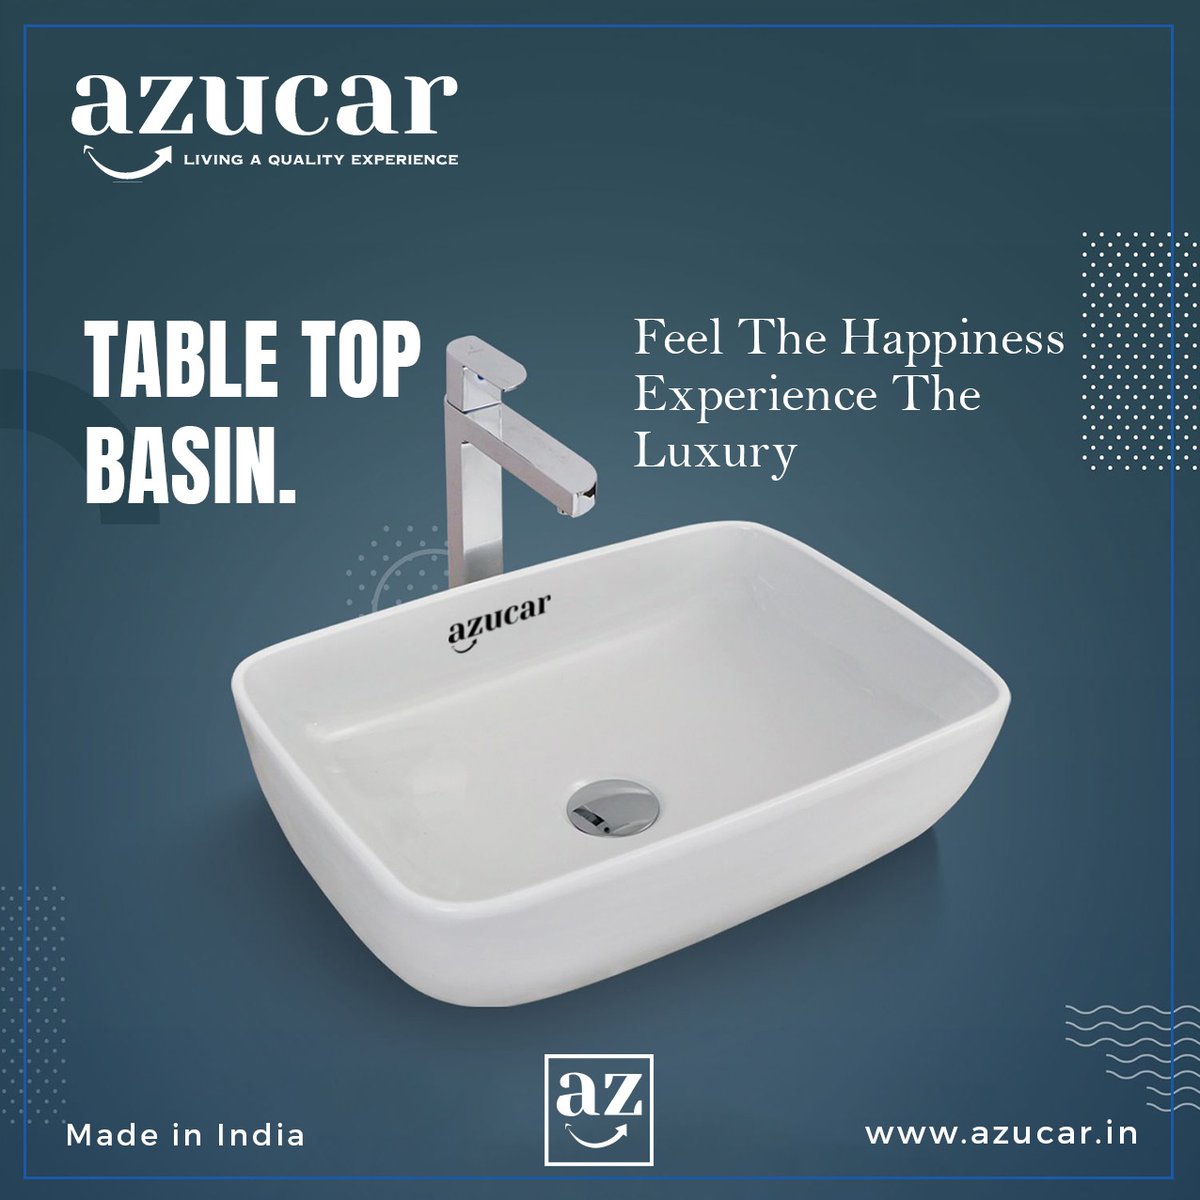 Give a new touch to your bath space with Azucar Table Top Wash Basin & experience luxury from a new angle.

#tabletopwashbasin #washbasin #SanitaryWares #Manufacturer #Supplier #LuxurySanitaryWares #Basin #washbasindesign #washbasindecor #azucarsanitaryware #azucar #azucarindia